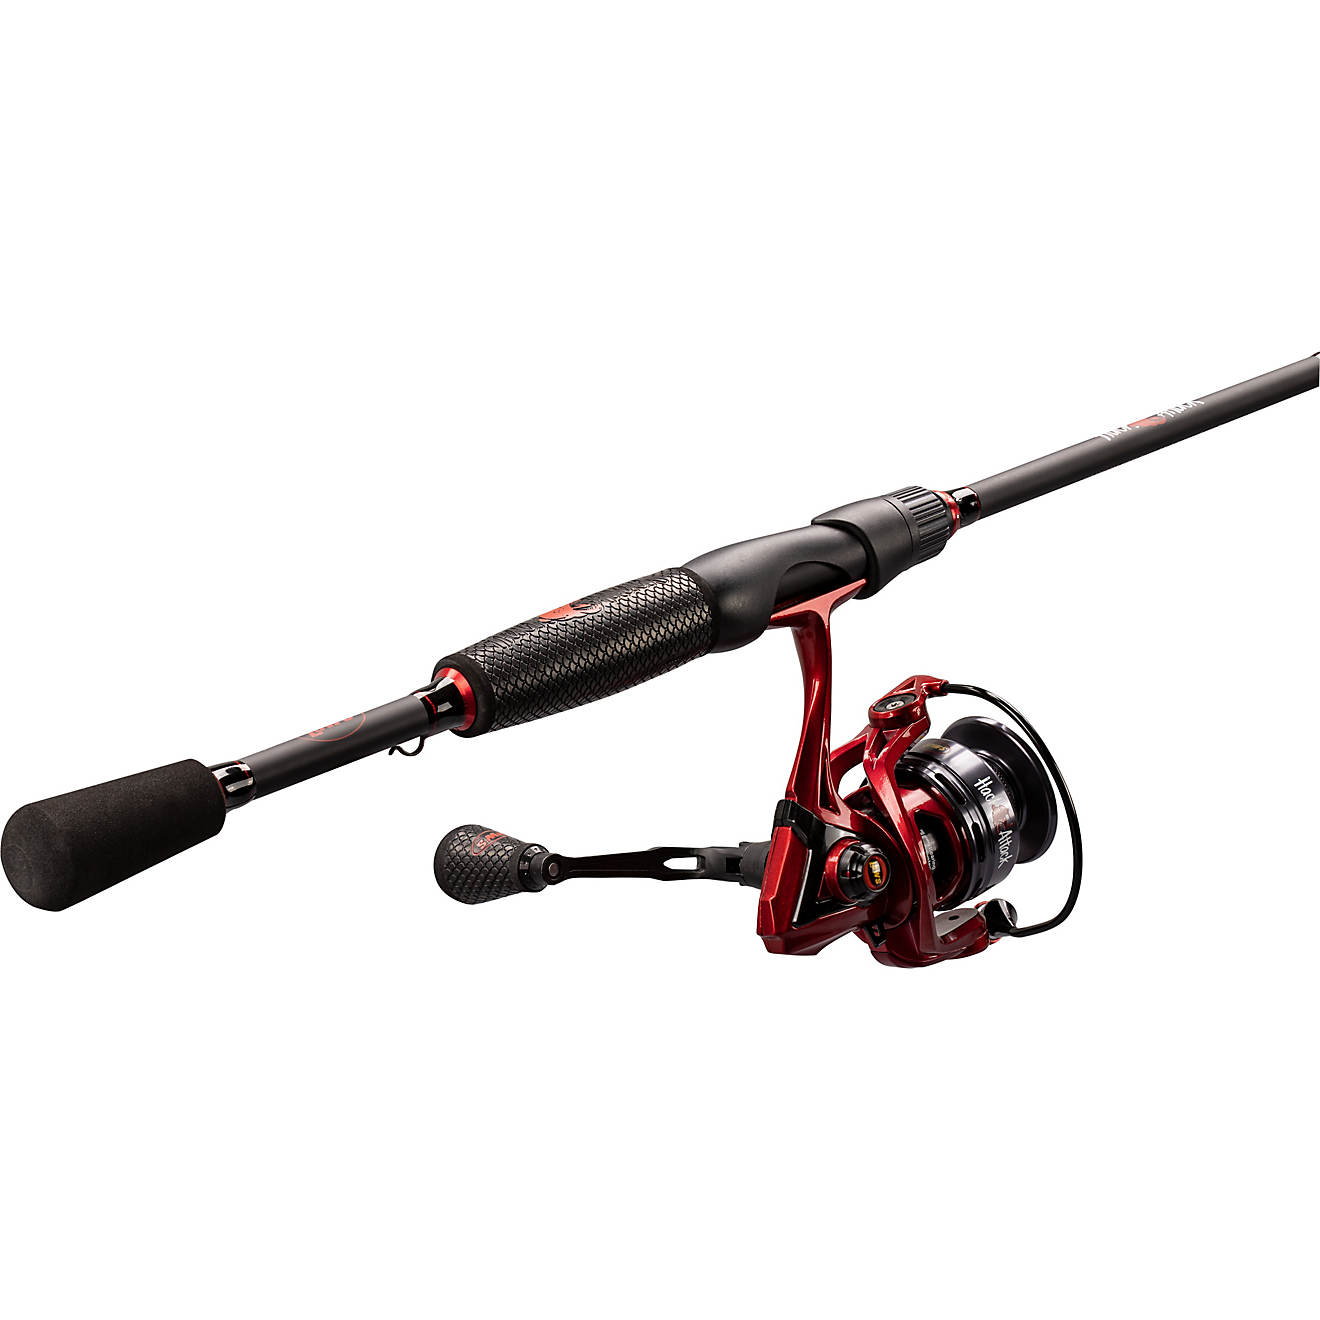 Lew's Hack Attack Rod Review